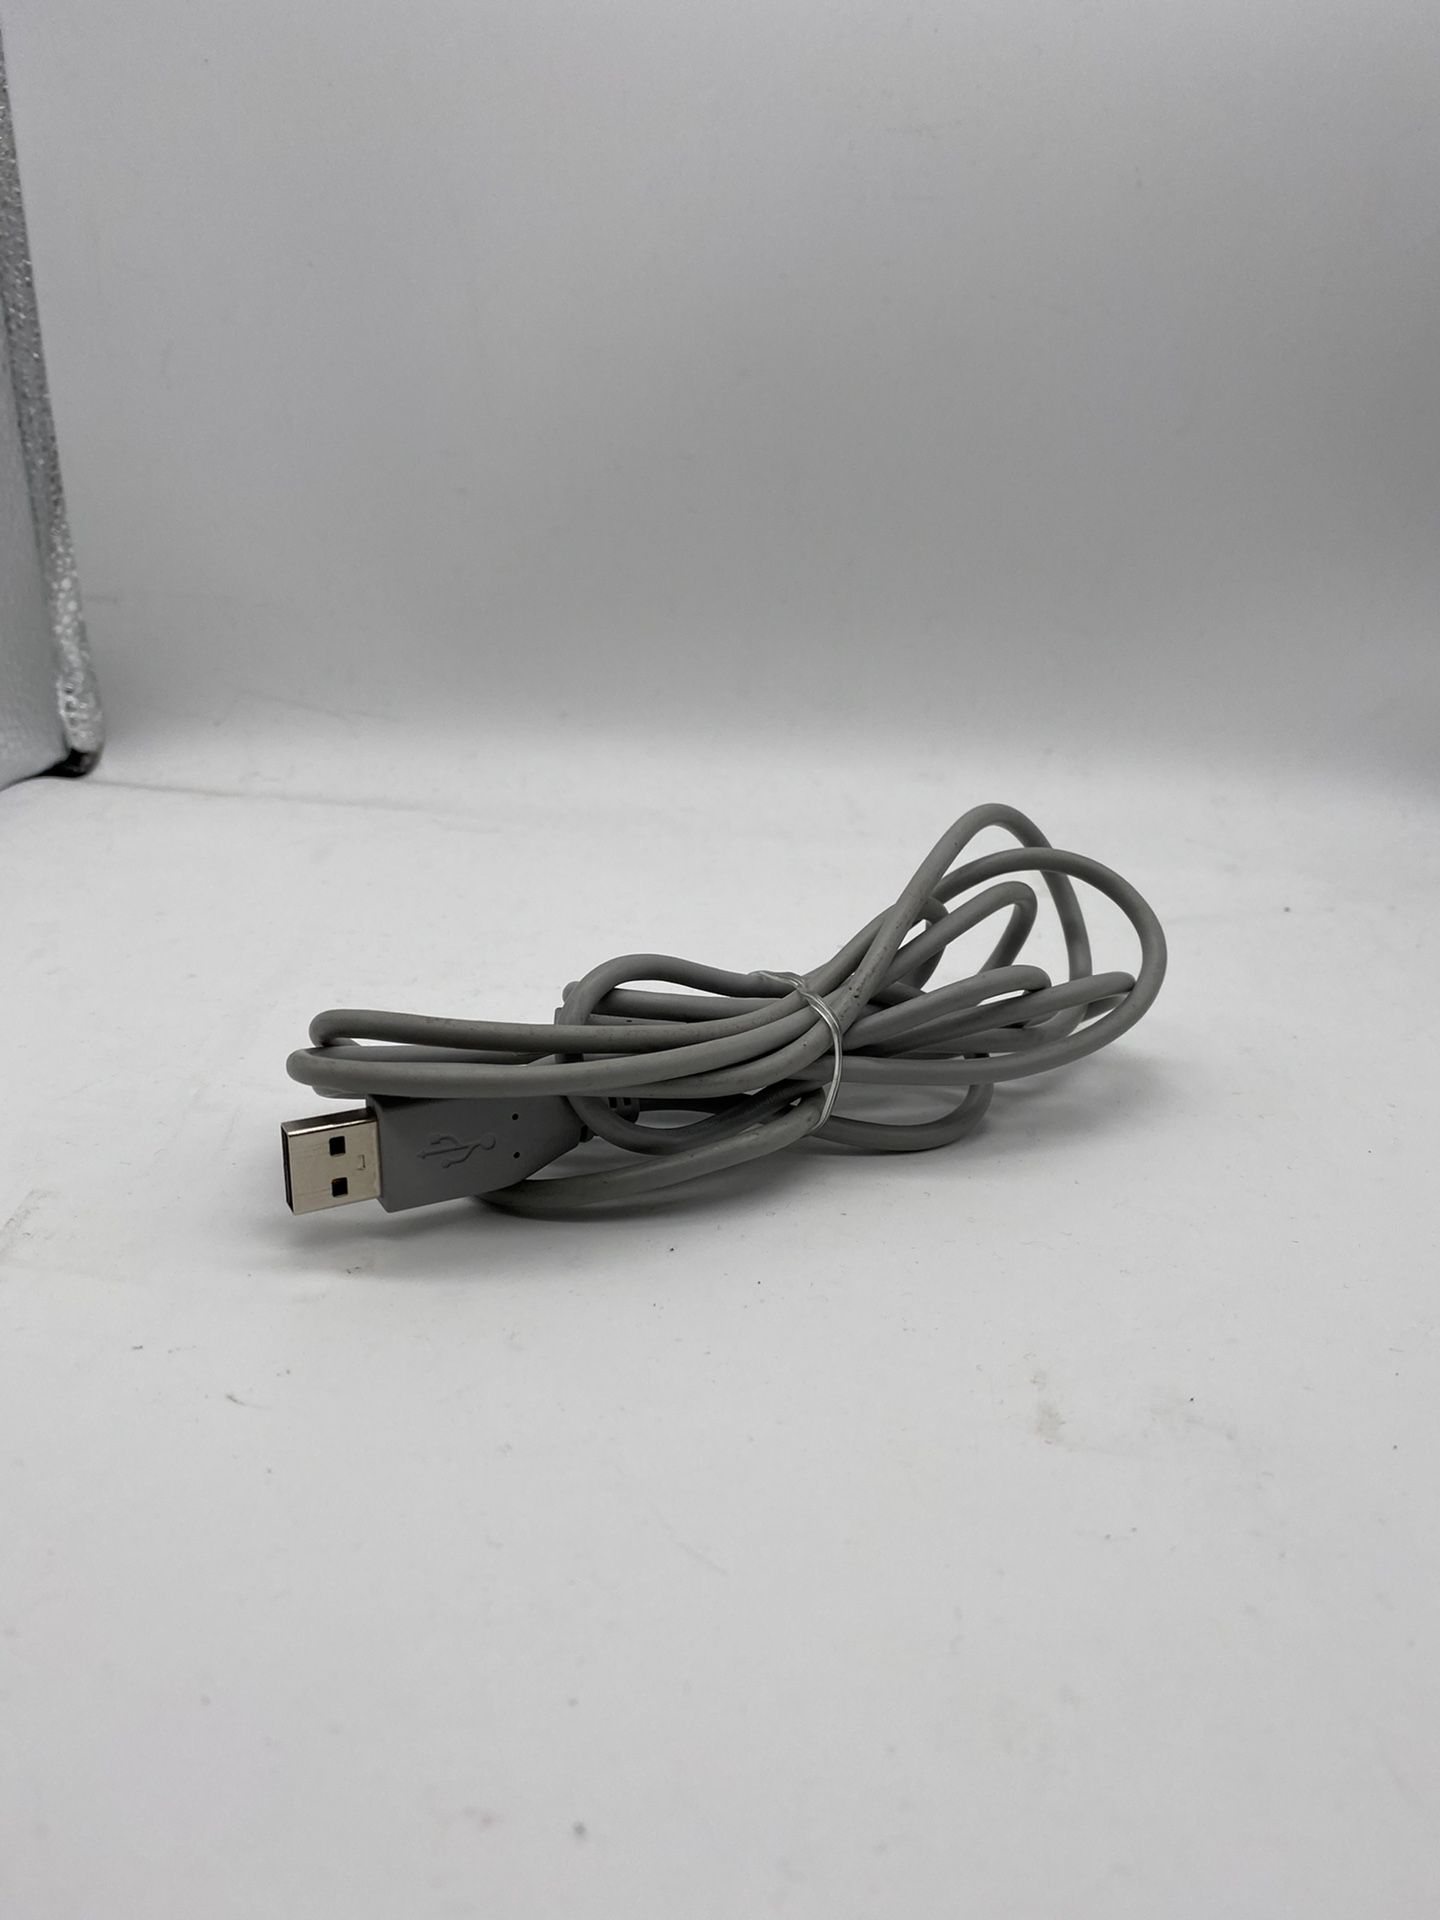 Charger Nintendo switch charging cable for Nintendo gray